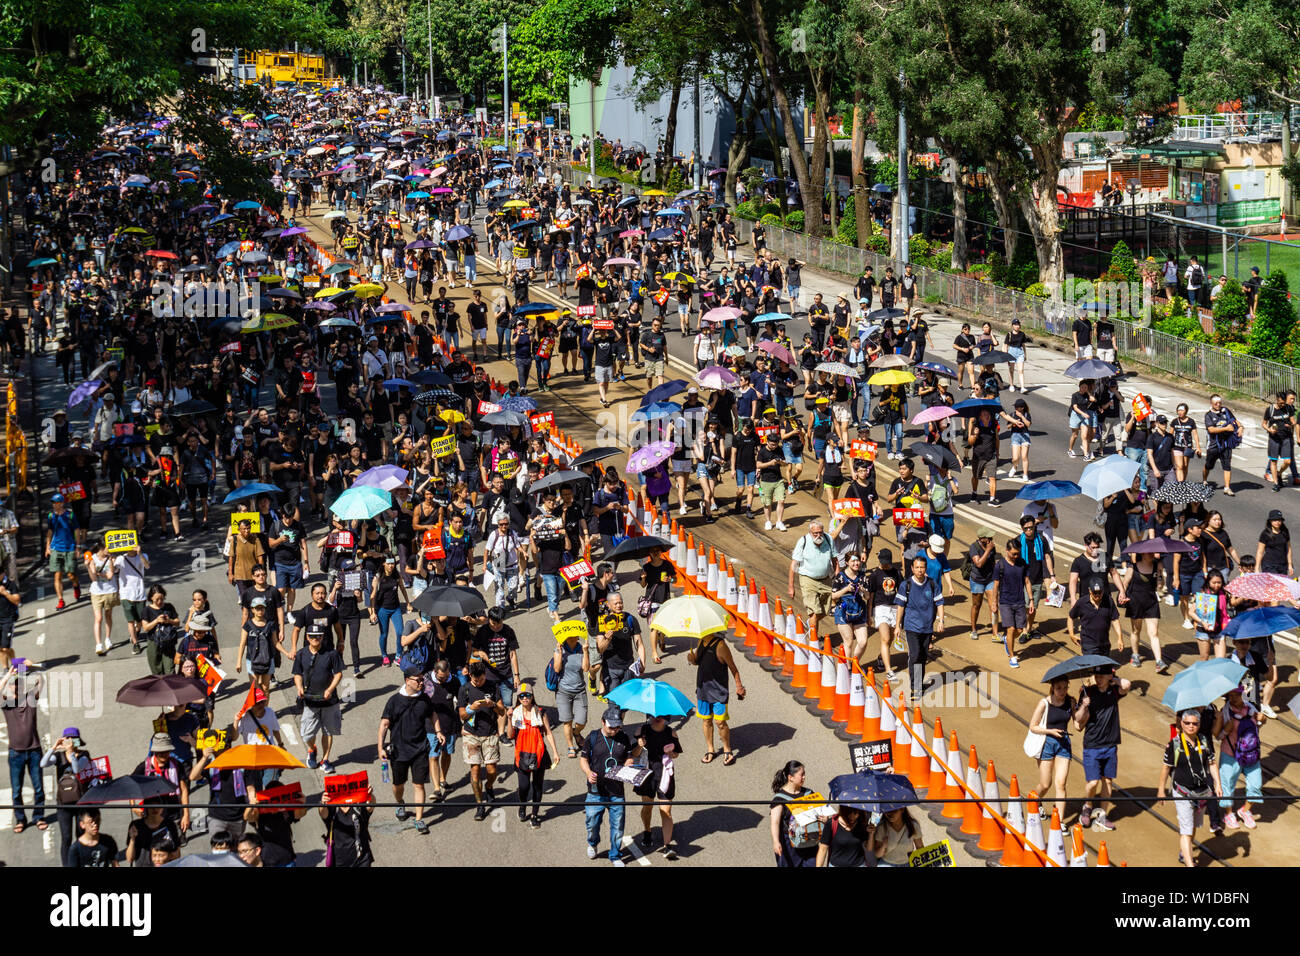 Hong Kong 2019 anti-extradition law protester march on July 1st, protesters carry umbrellas to protect themselves against the scorching sun Stock Photo